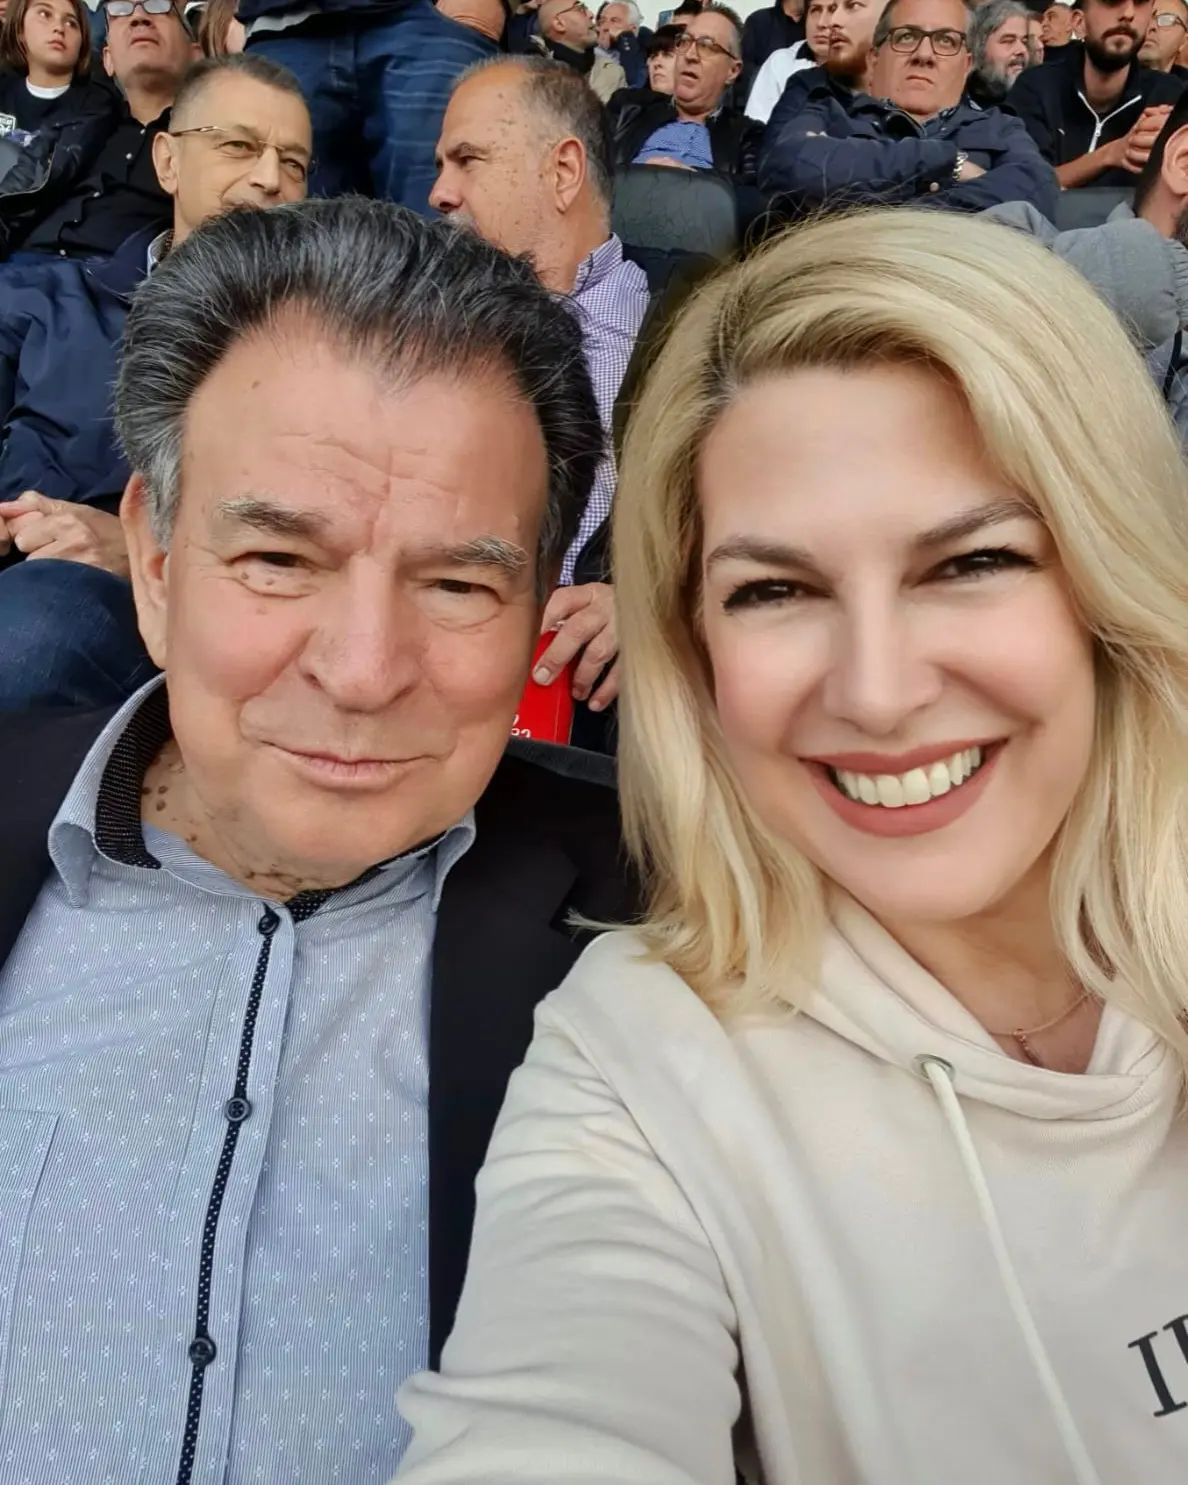 Photo by raniathraskia in Toumba Stadium PAOK FC. May be an image of 6 people and stadium